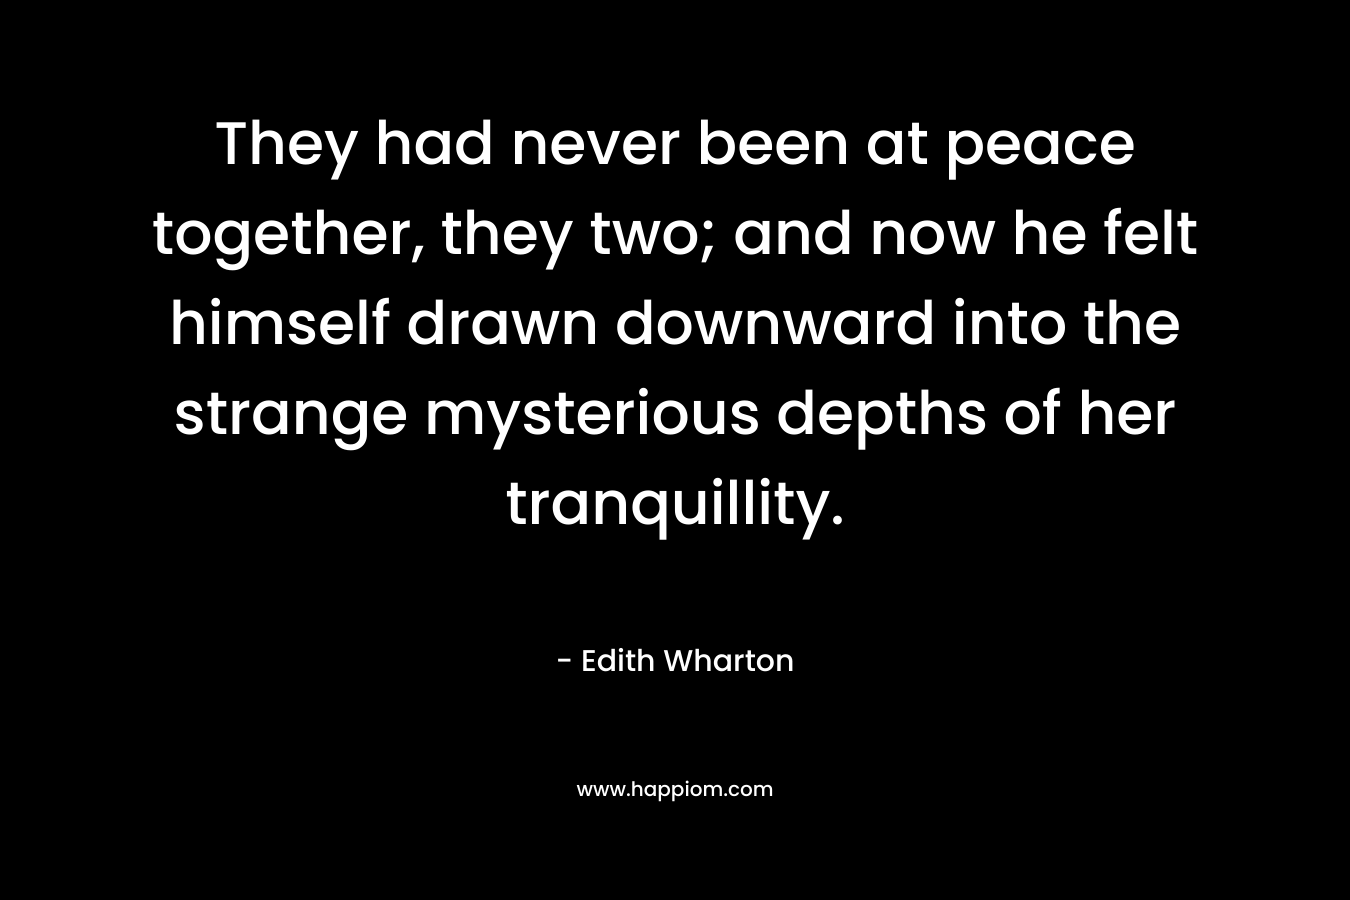 They had never been at peace together, they two; and now he felt himself drawn downward into the strange mysterious depths of her tranquillity. – Edith Wharton